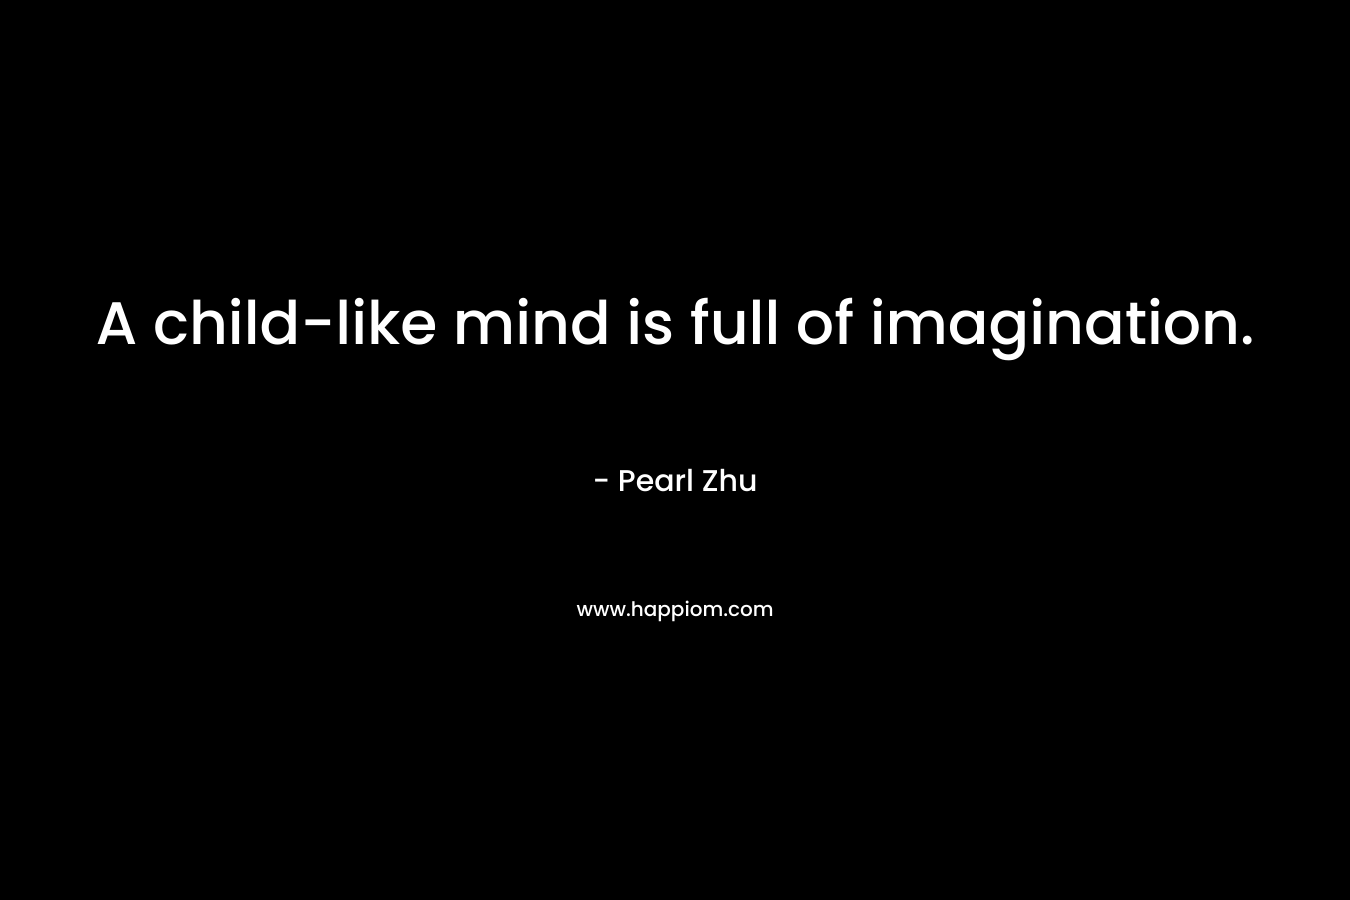 A child-like mind is full of imagination.